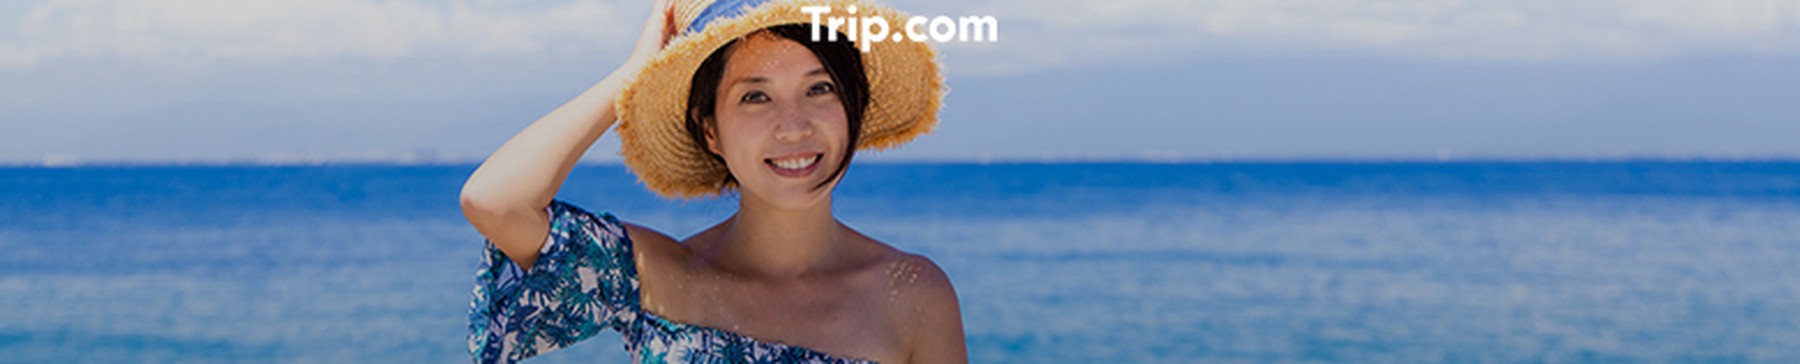 Score 8% discount on tickets at Trip.com